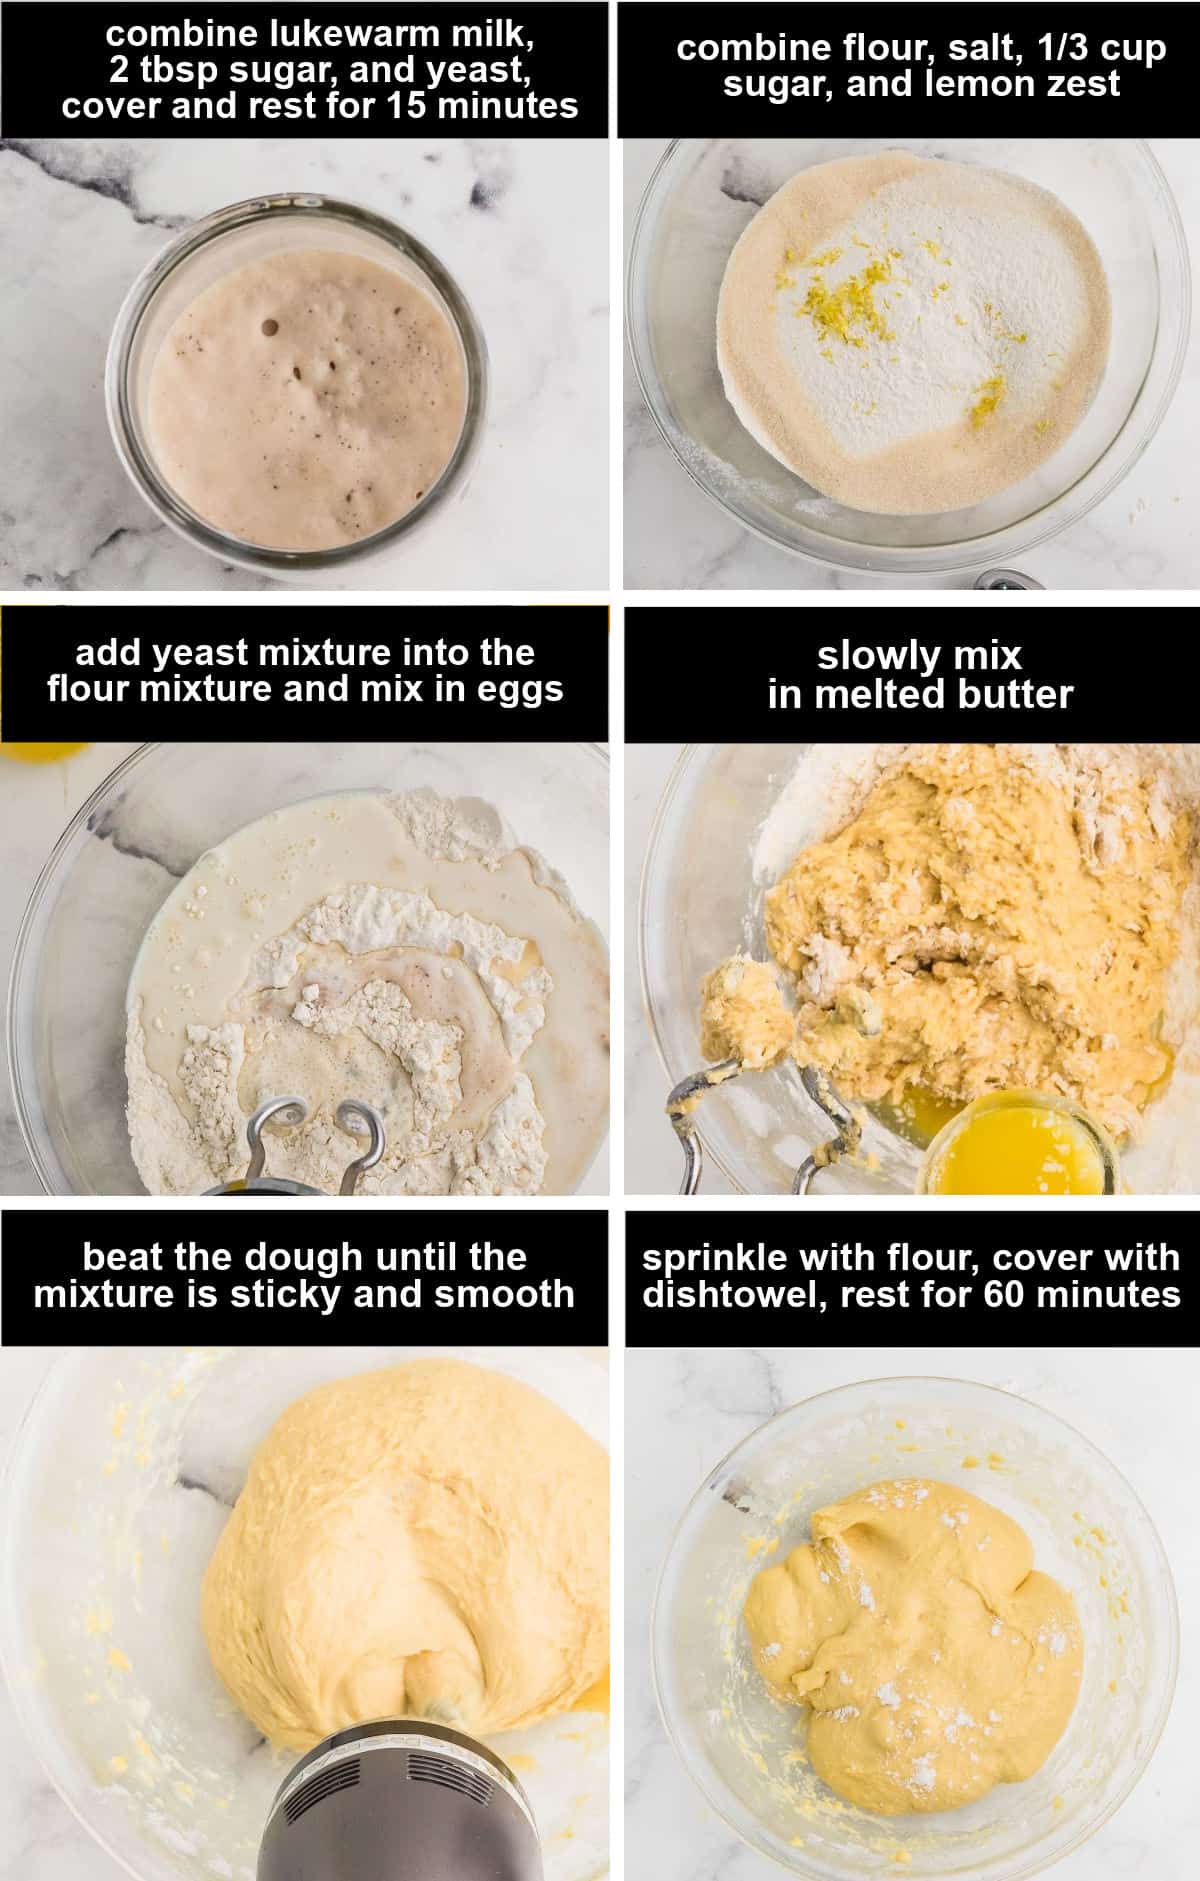 collage of images showing the steps how to make the yeast dough for the German Butterkuchen (butter cake)